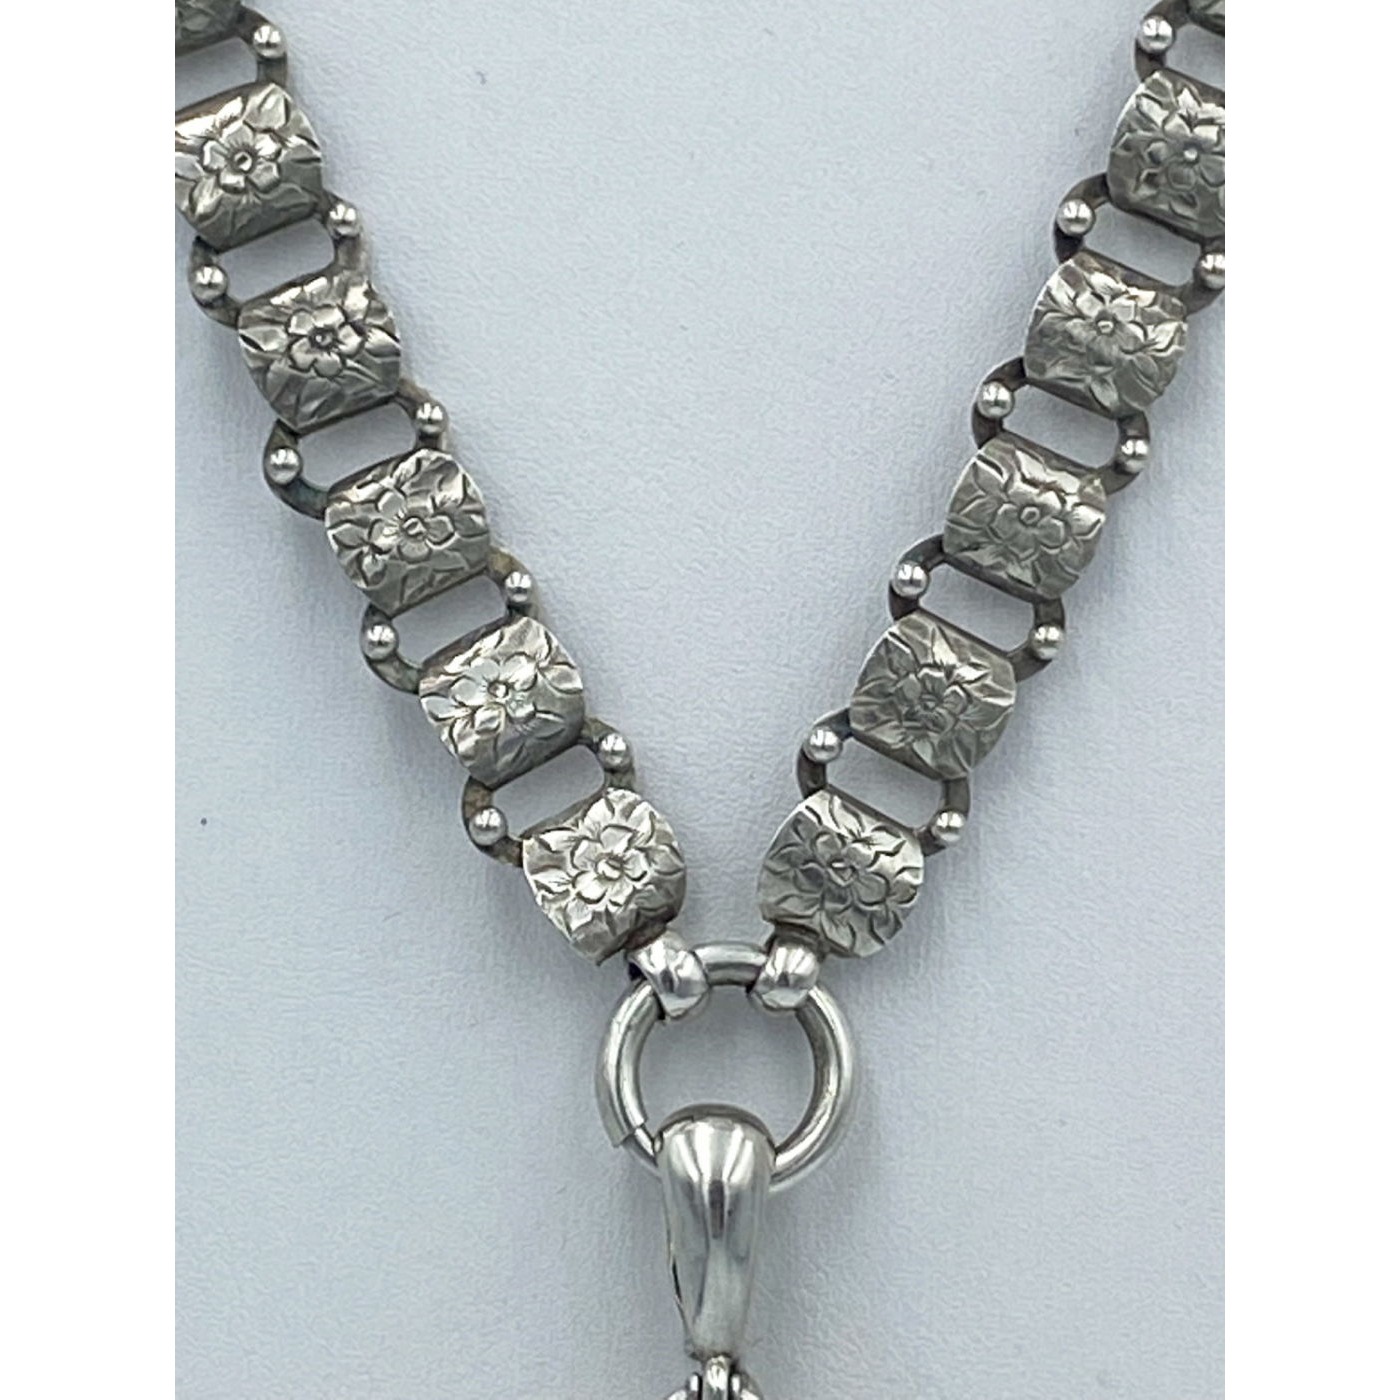 Lovely Floral Link 16" Victorian Sterling Silver Book Chain